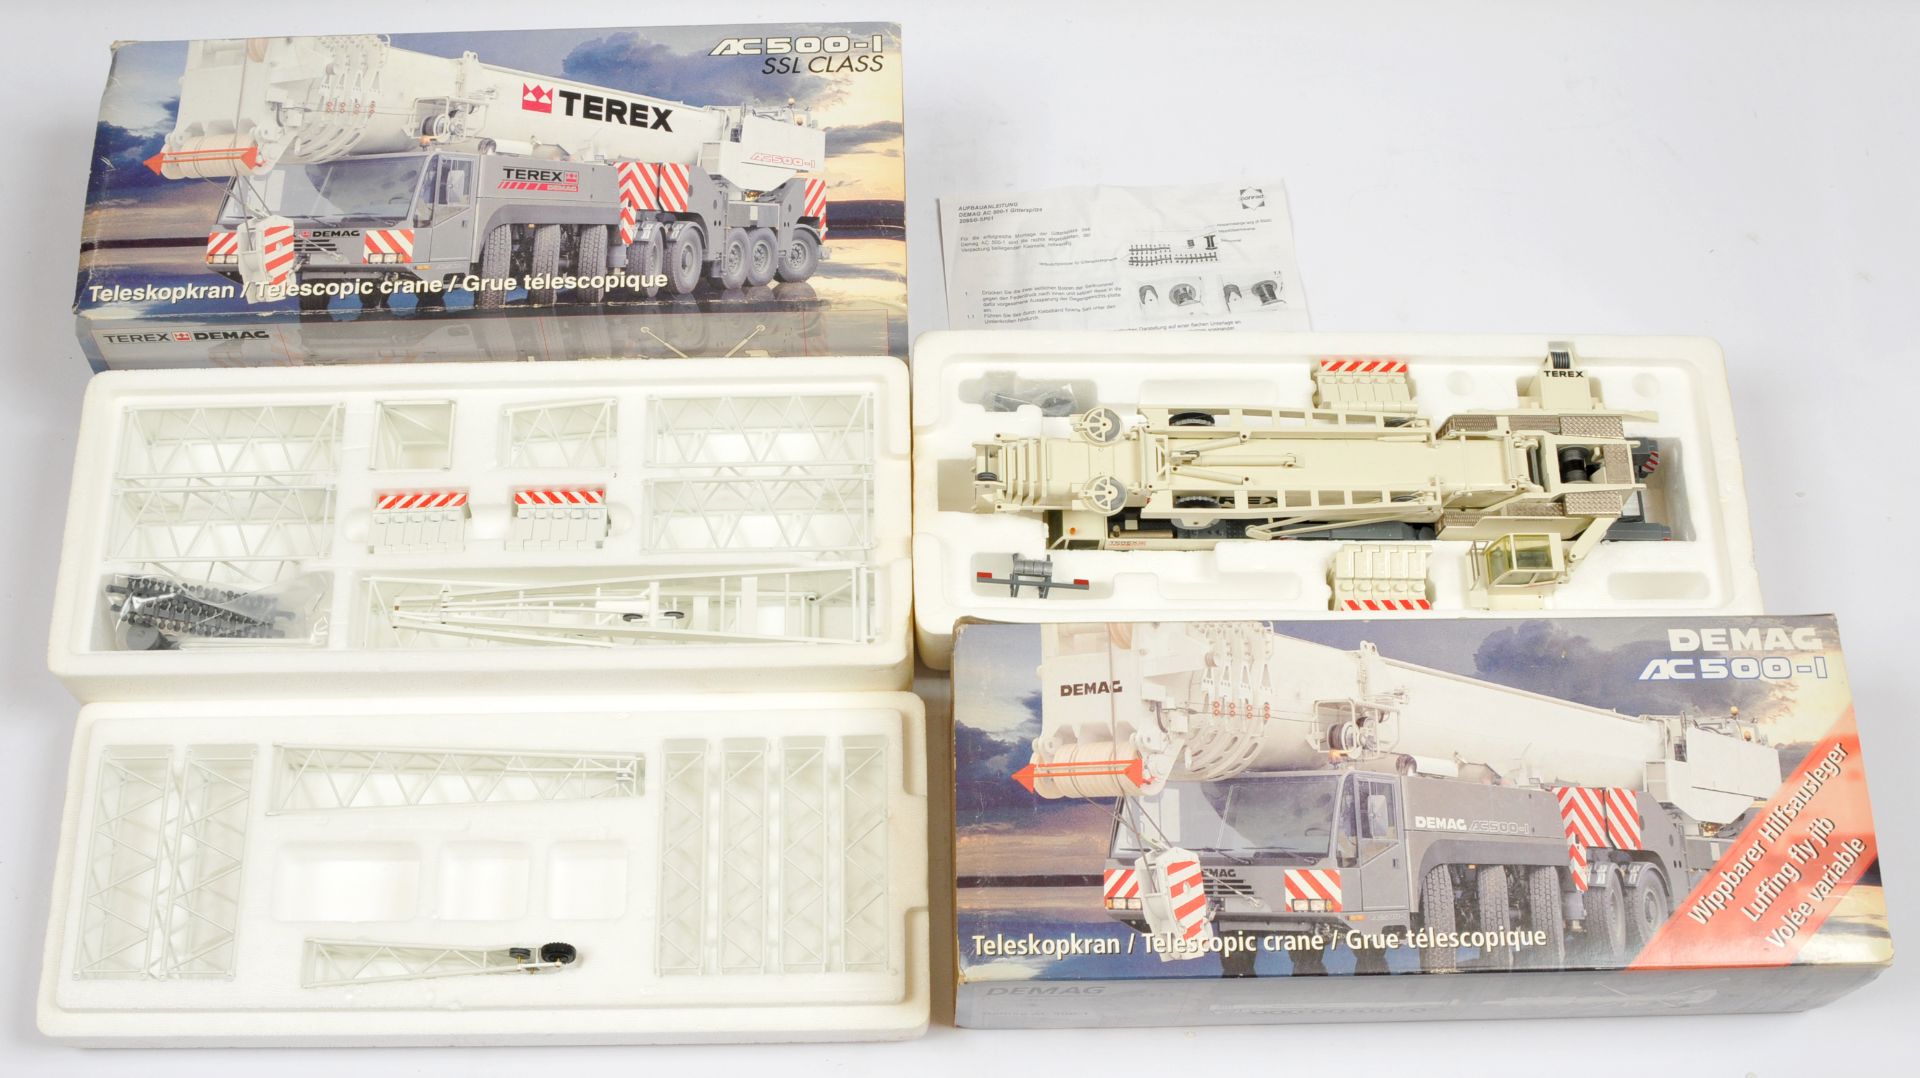 Conrad  Models  A Pair (1/50th) 2098/0 Demag "Terex" AC 500-1 Mobile Crane - White and Grey and  ...